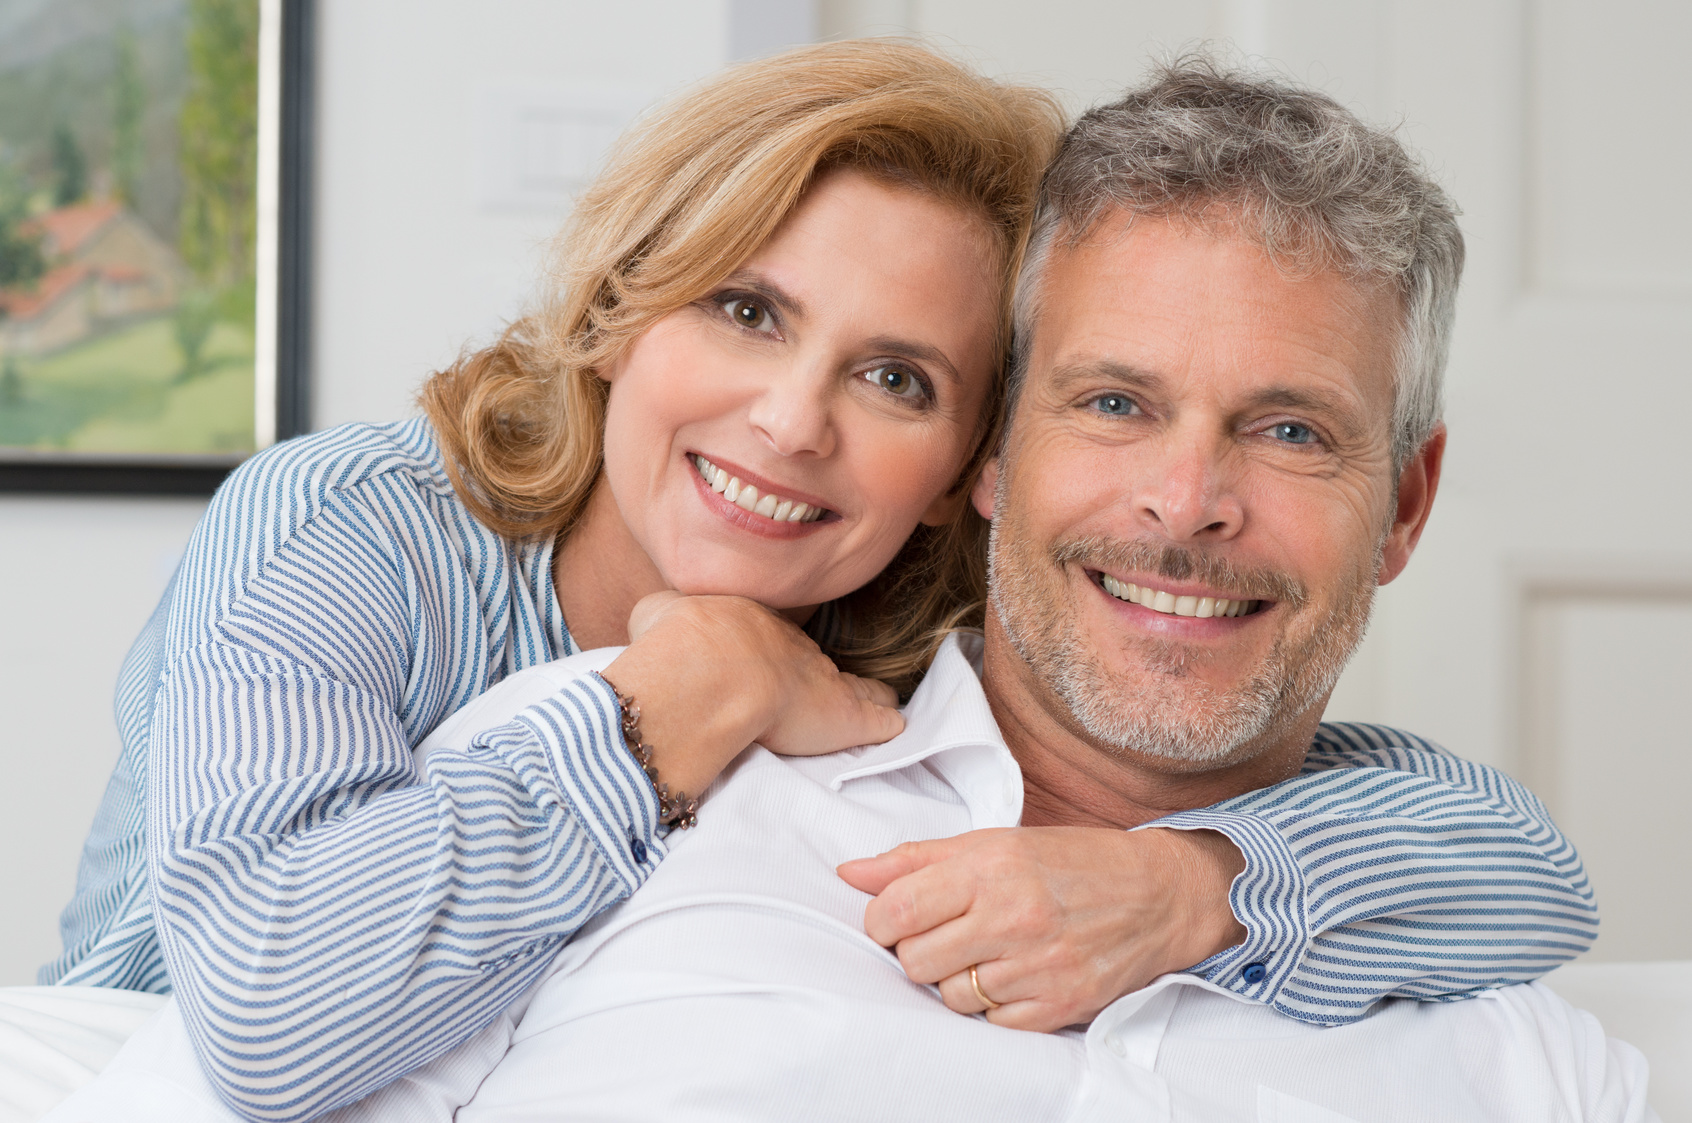 Portrait Of A Mature Couple Smiling And Embracing At Home